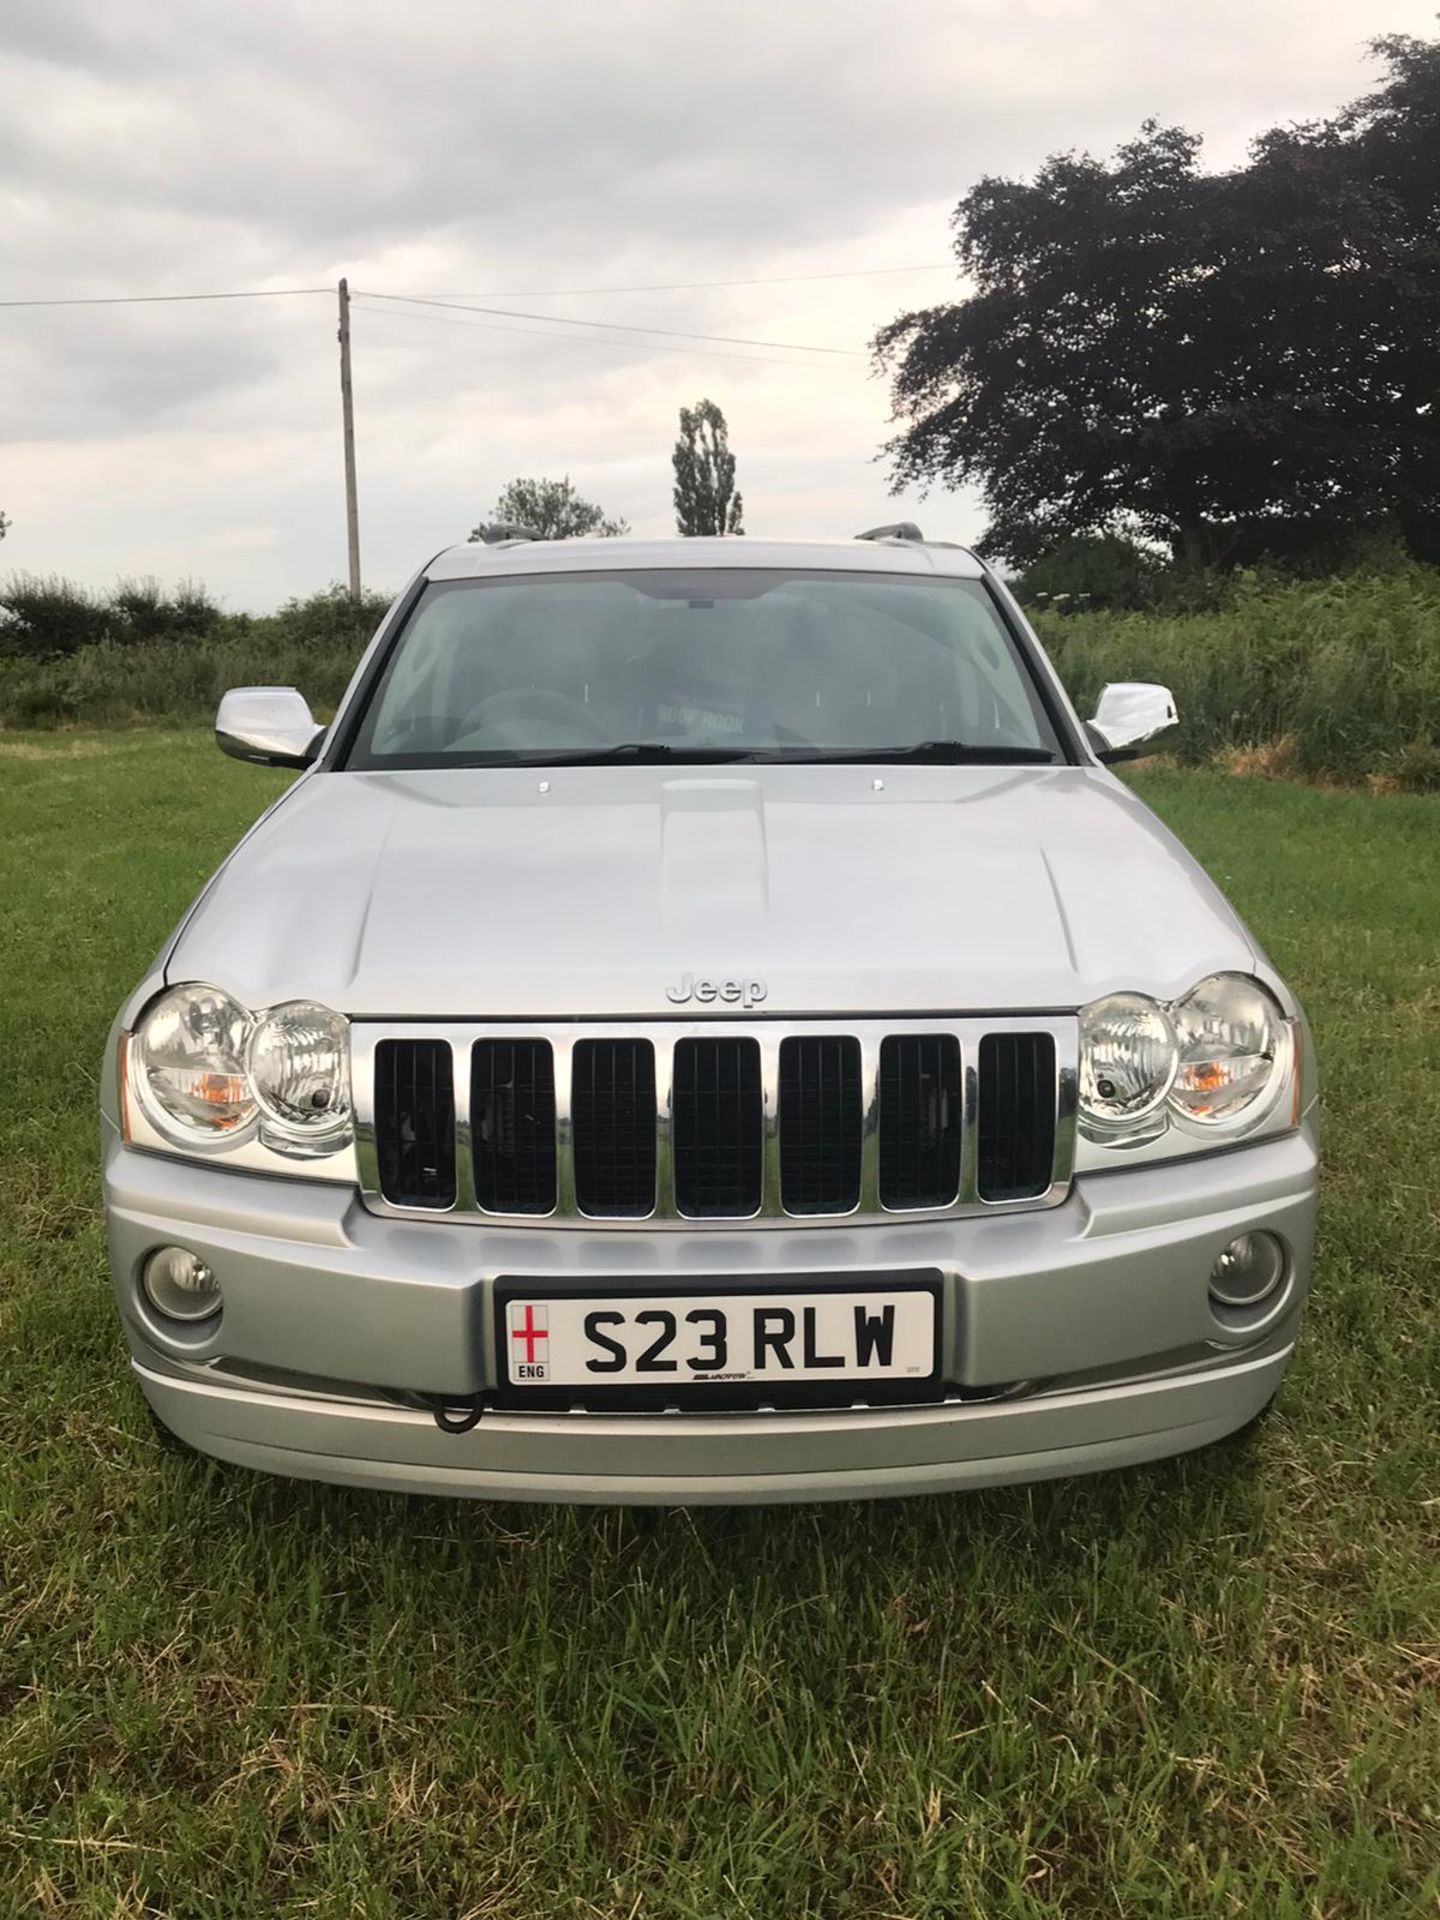 2005/55 REG JEEP GRAND CHEROKEE V6 CRD LIMITED 3.0 DIESEL AUTOMATIC 215 BHP *NO VAT* - Image 2 of 8